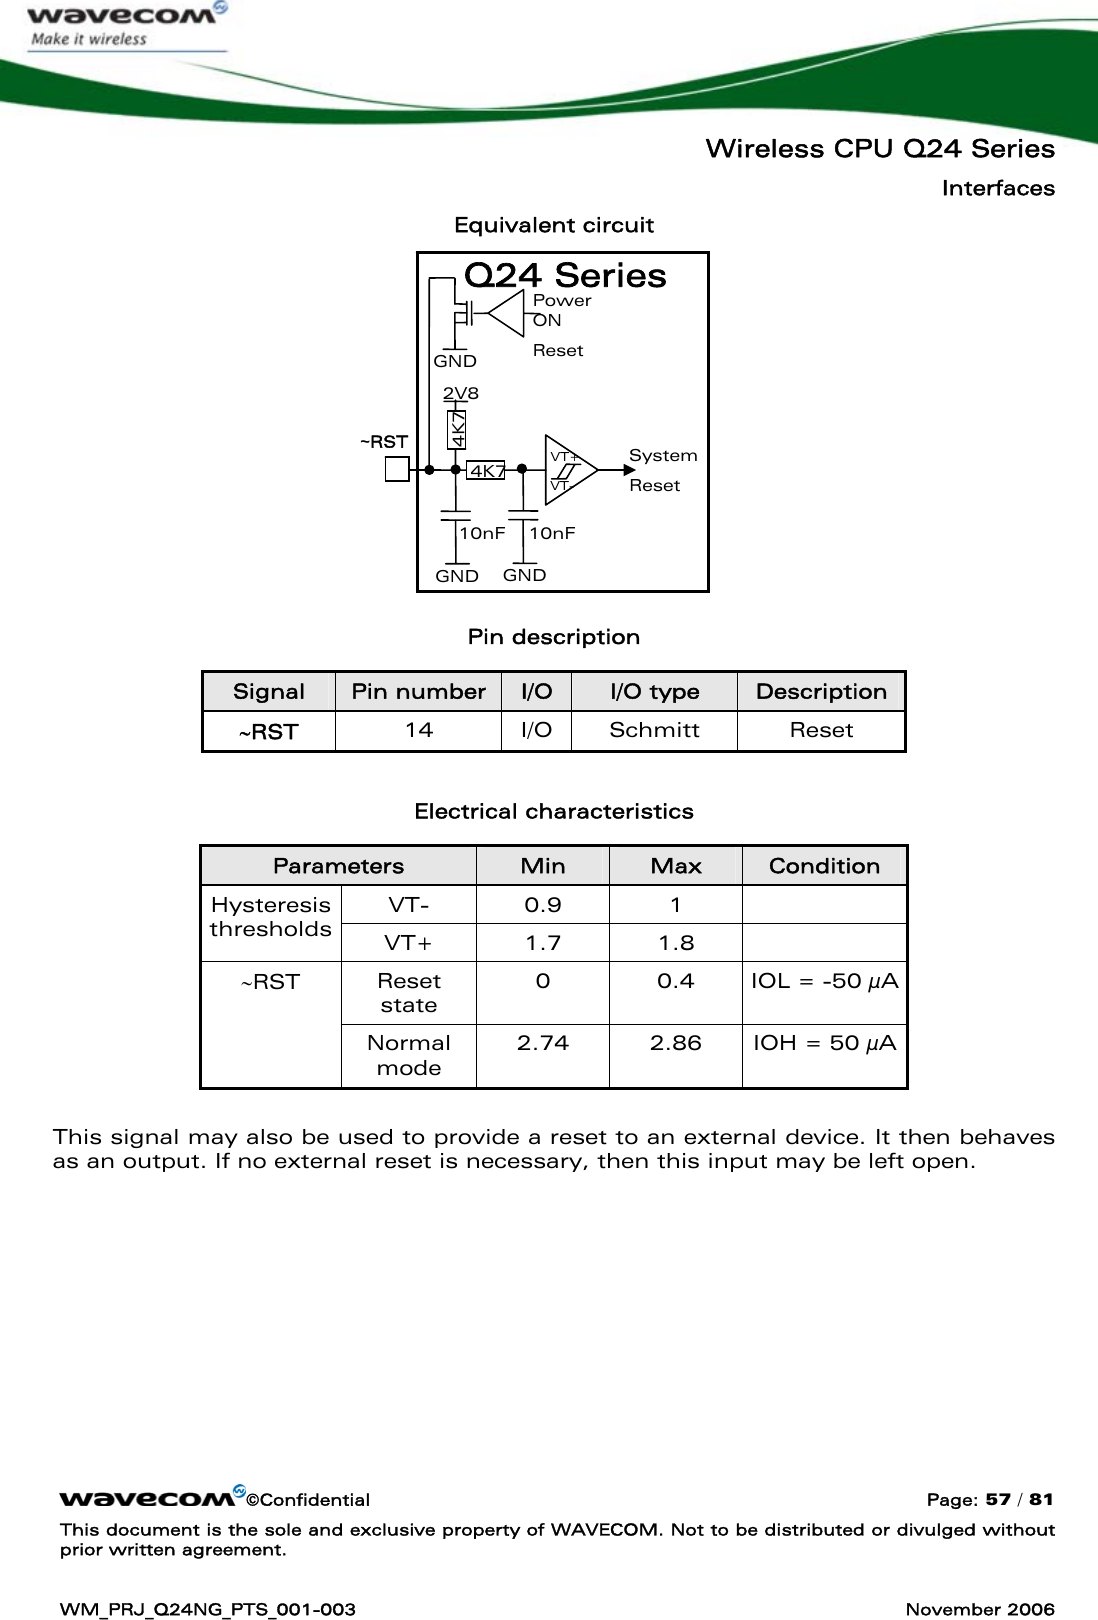   Wireless CPU Q24 Series Interfaces ©Confidential  Page: 57 / 81 This document is the sole and exclusive property of WAVECOM. Not to be distributed or divulged without prior written agreement.  WM_PRJ_Q24NG_PTS_001-003  November 2006  Equivalent circuit          Pin description Signal  Pin number  I/O  I/O type  Description ∼RST  14 I/O Schmitt Reset  Electrical characteristics Parameters  Min  Max  Condition VT- 0.9  1   Hysteresis thresholds  VT+ 1.7  1.8   Reset state 0  0.4  IOL = -50 μA ∼RST Normal mode 2.74  2.86  IOH = 50 μA  This signal may also be used to provide a reset to an external device. It then behaves as an output. If no external reset is necessary, then this input may be left open.  System Reset  GND GND 10nF GND Power ON Reset   2V8 10nF VT- VT+ 4K7 4K7 ~RST  Q24 Series 